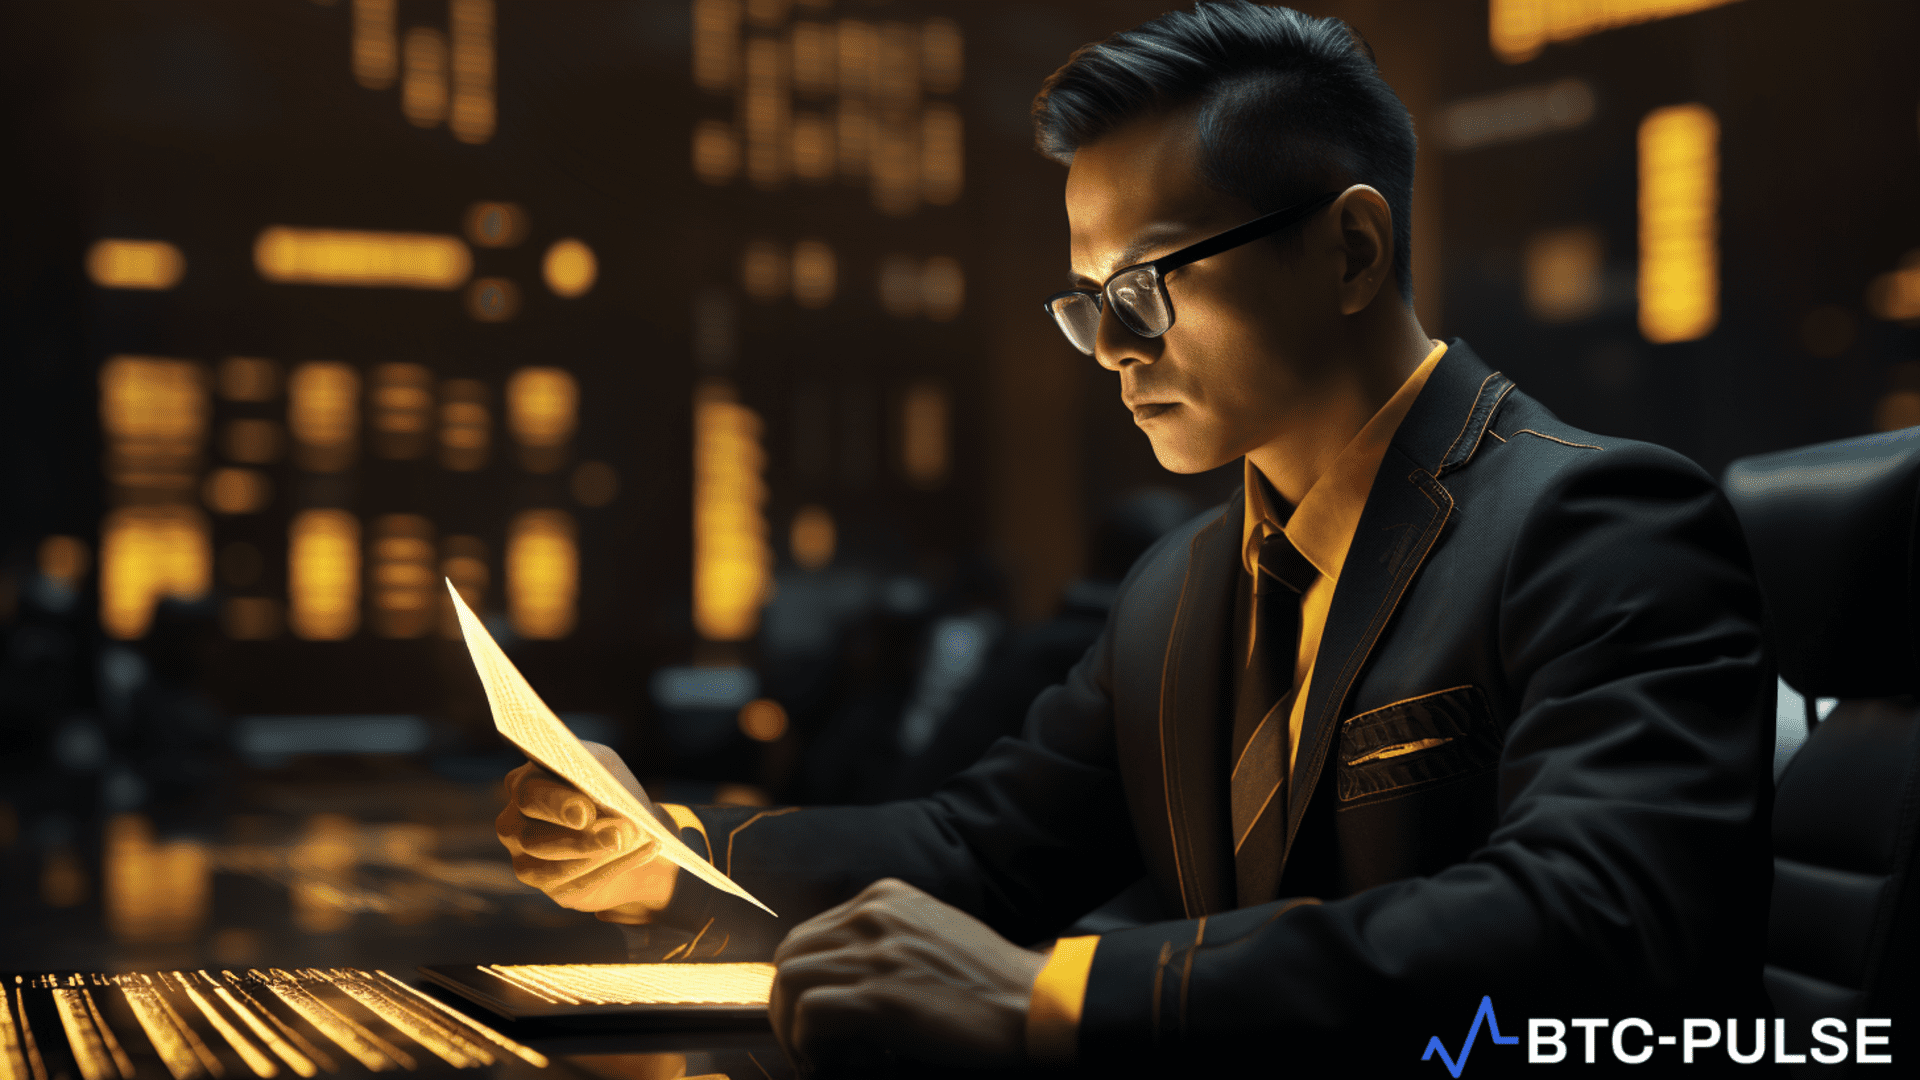 Binance updates spot trading platform, delisting six pairs and introducing new USDC trading pairs